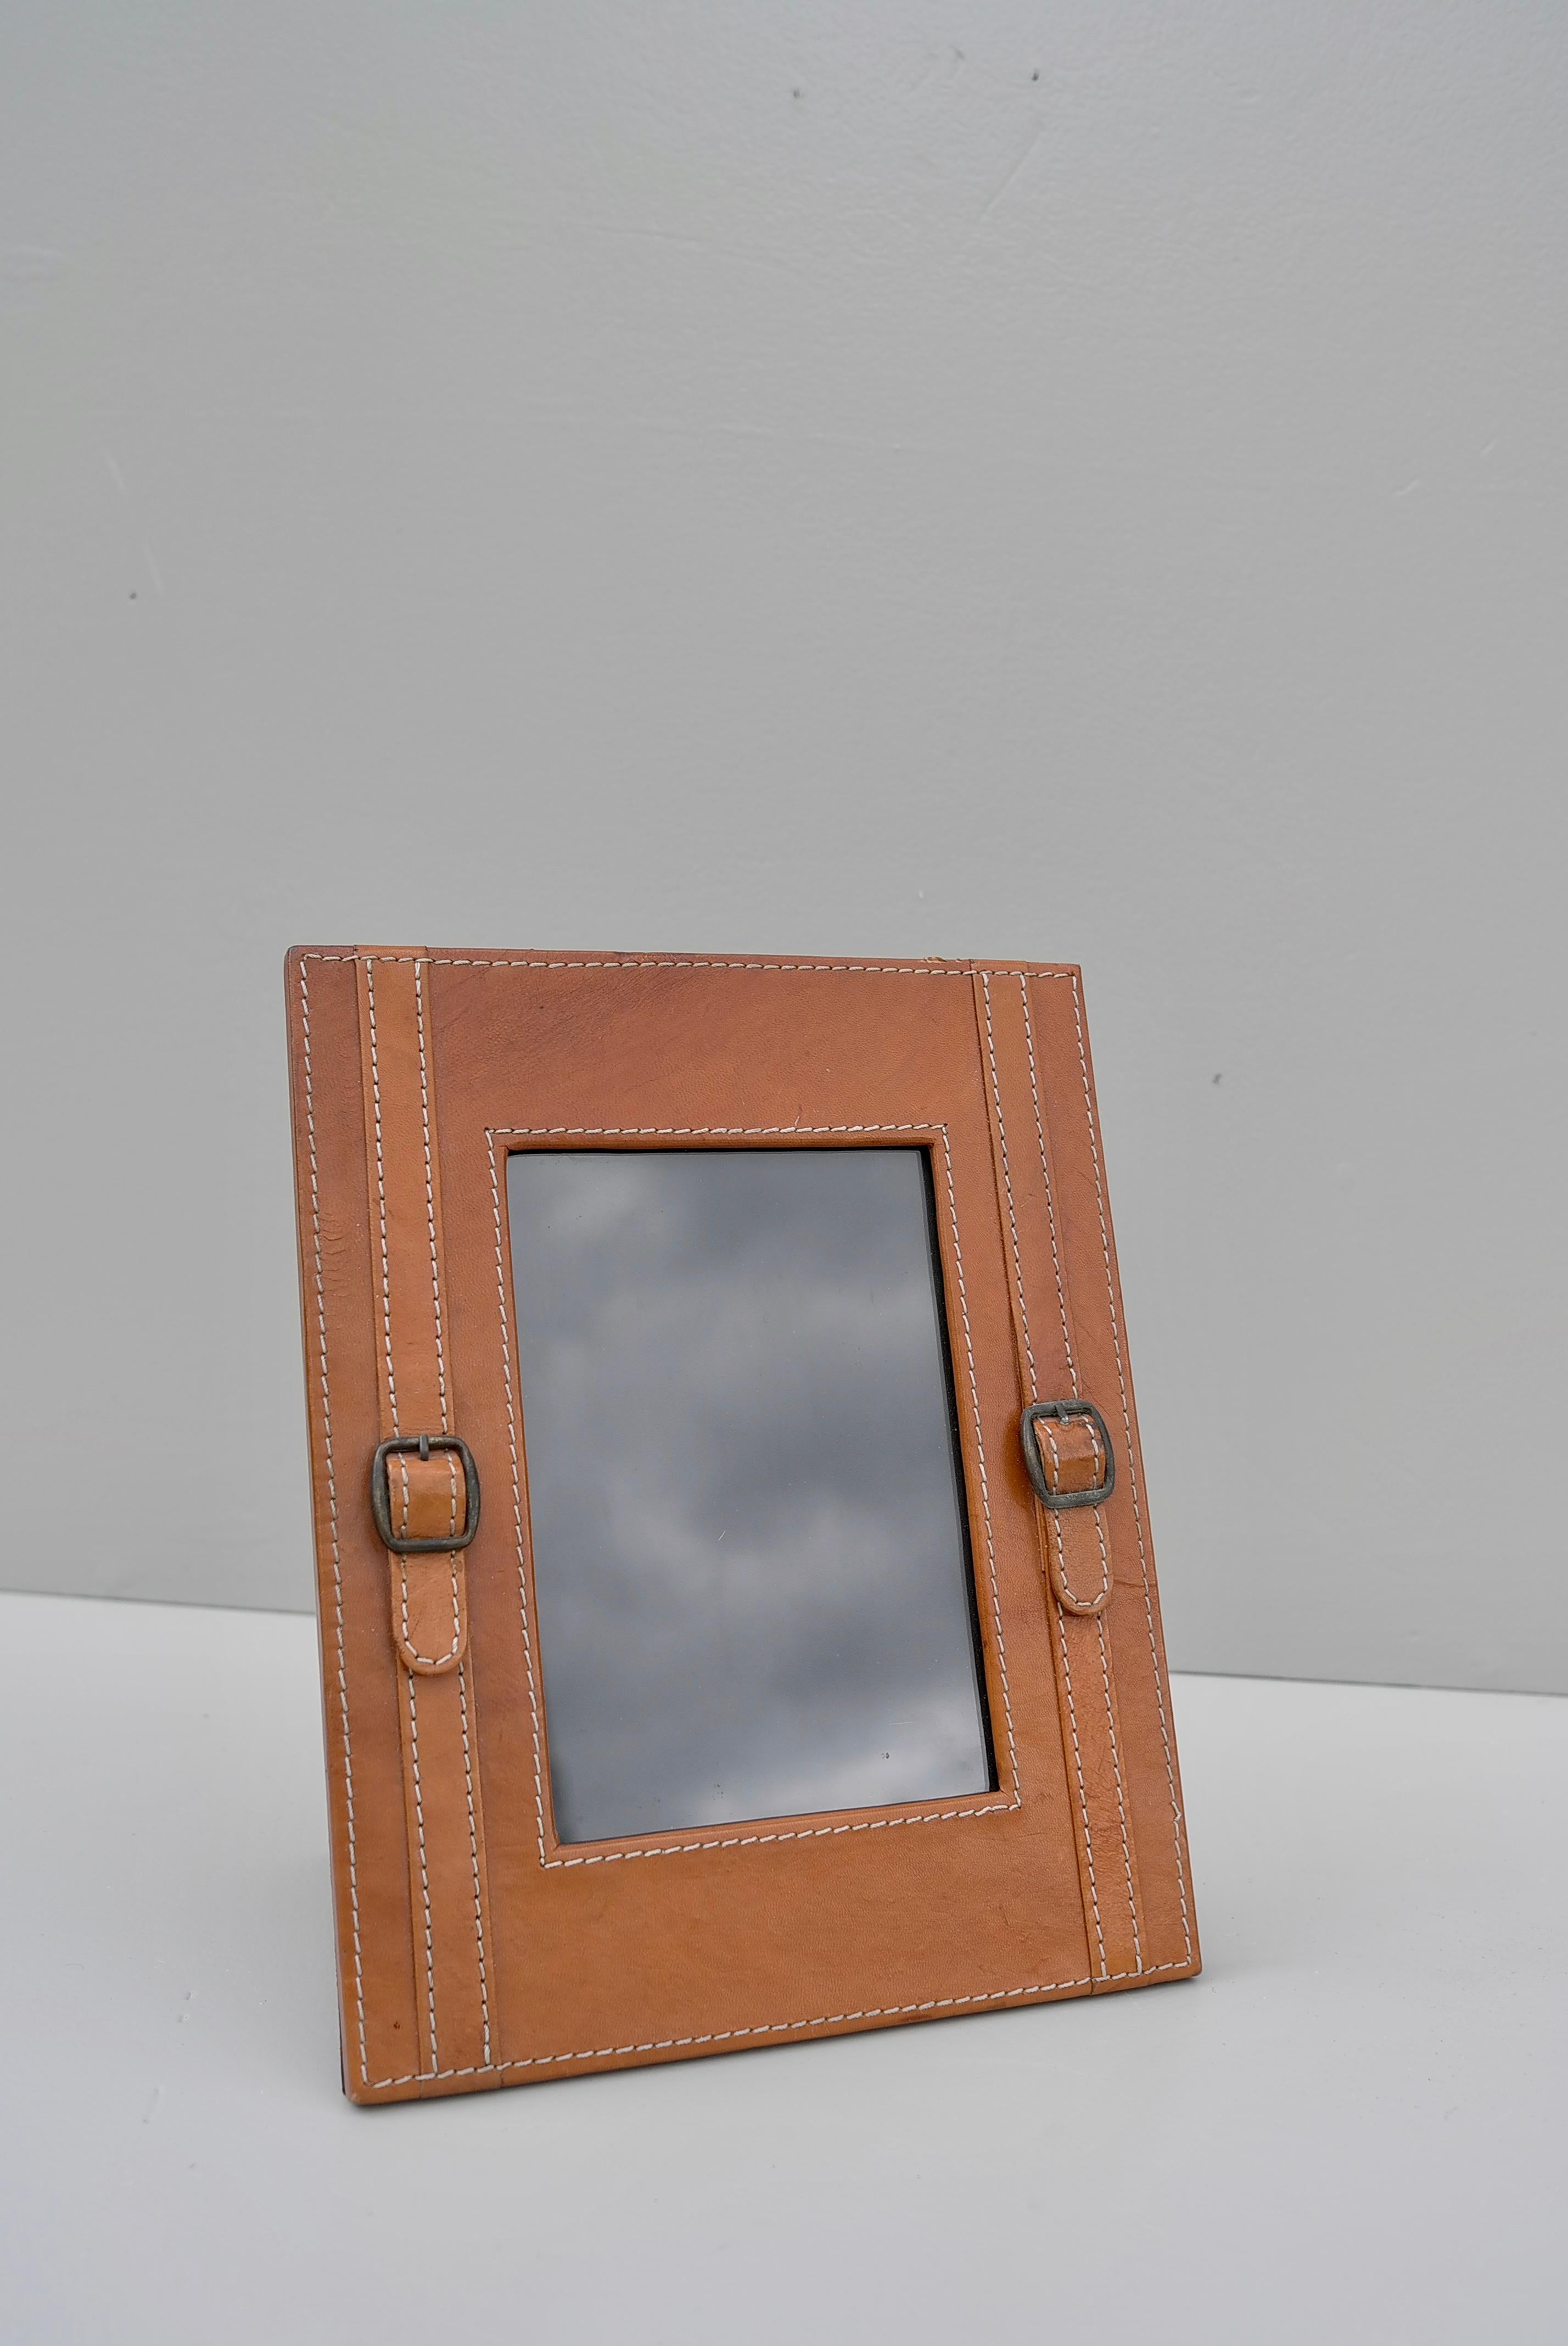 20th Century Hand-Stitched Cognac Leather Picture Frame in Style of Jacques Adnet For Sale